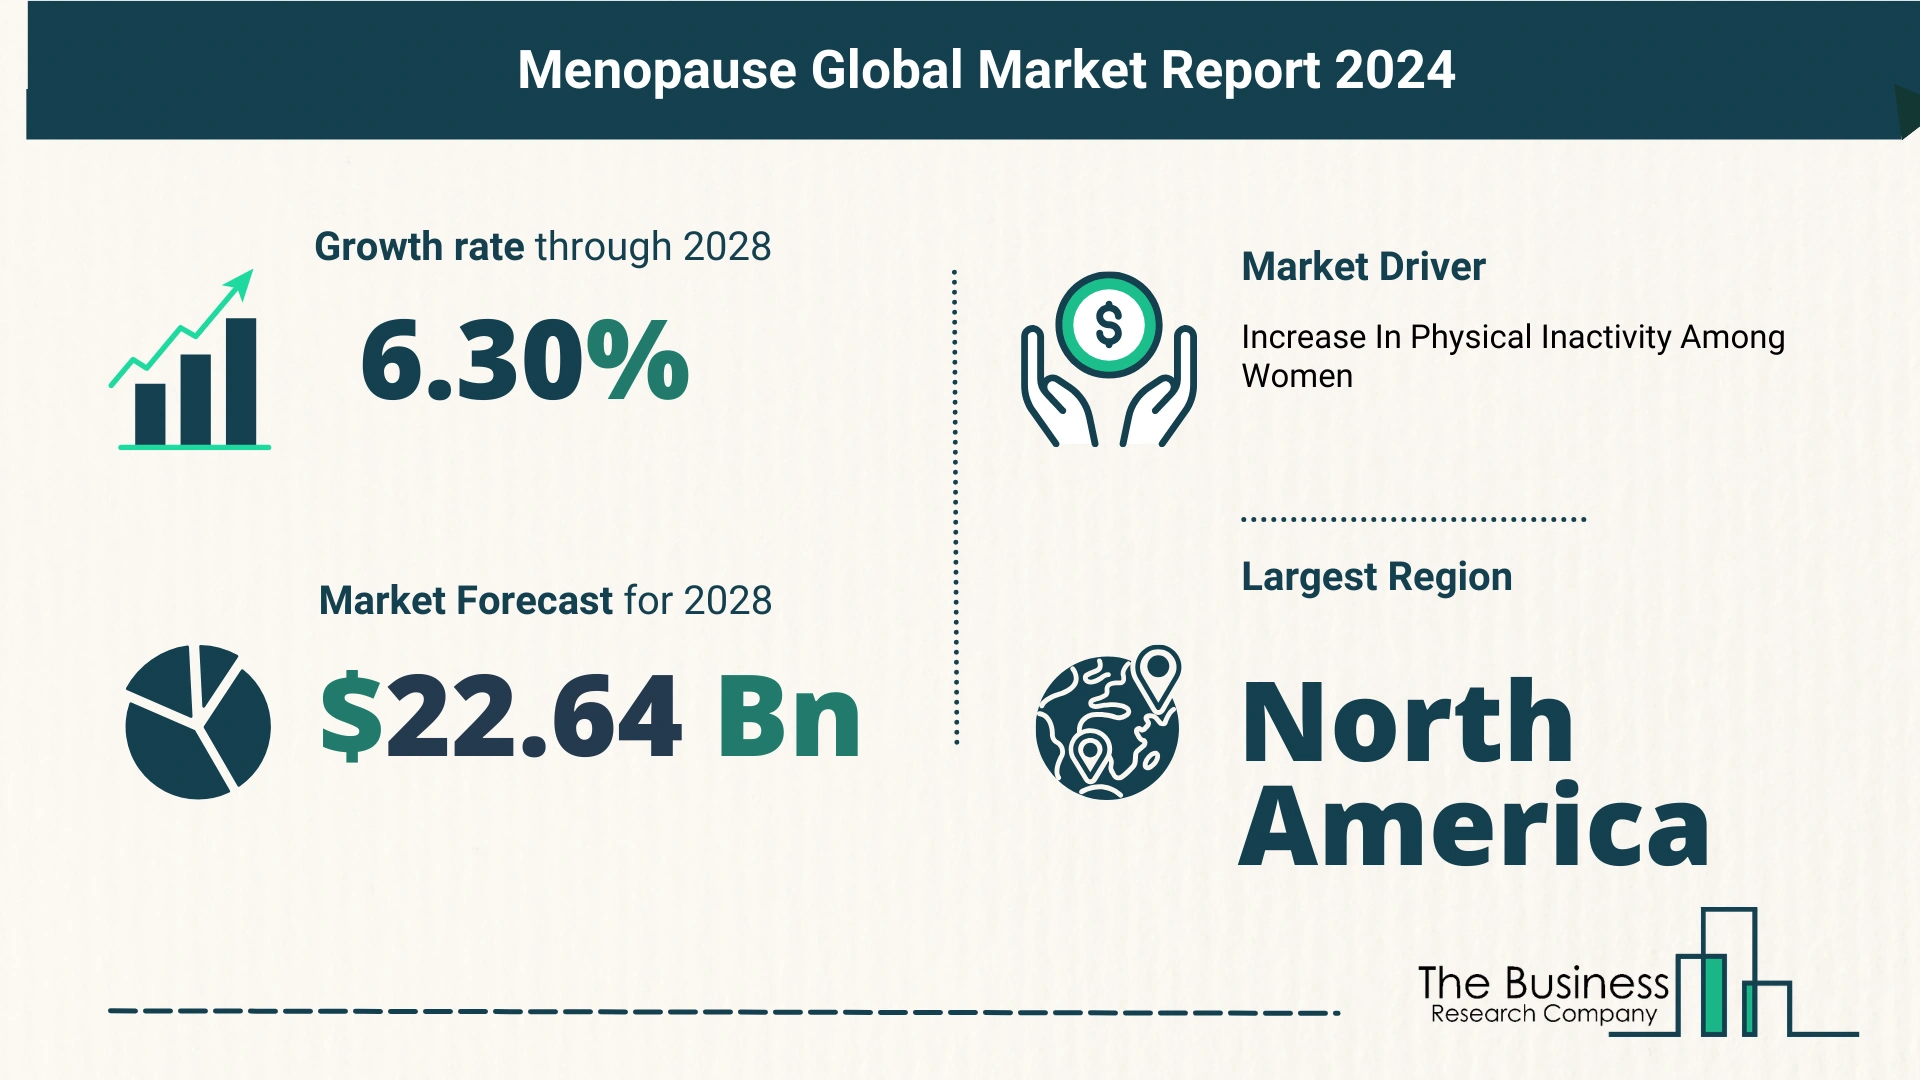 Top 5 Insights From The Menopause Market Report 2024